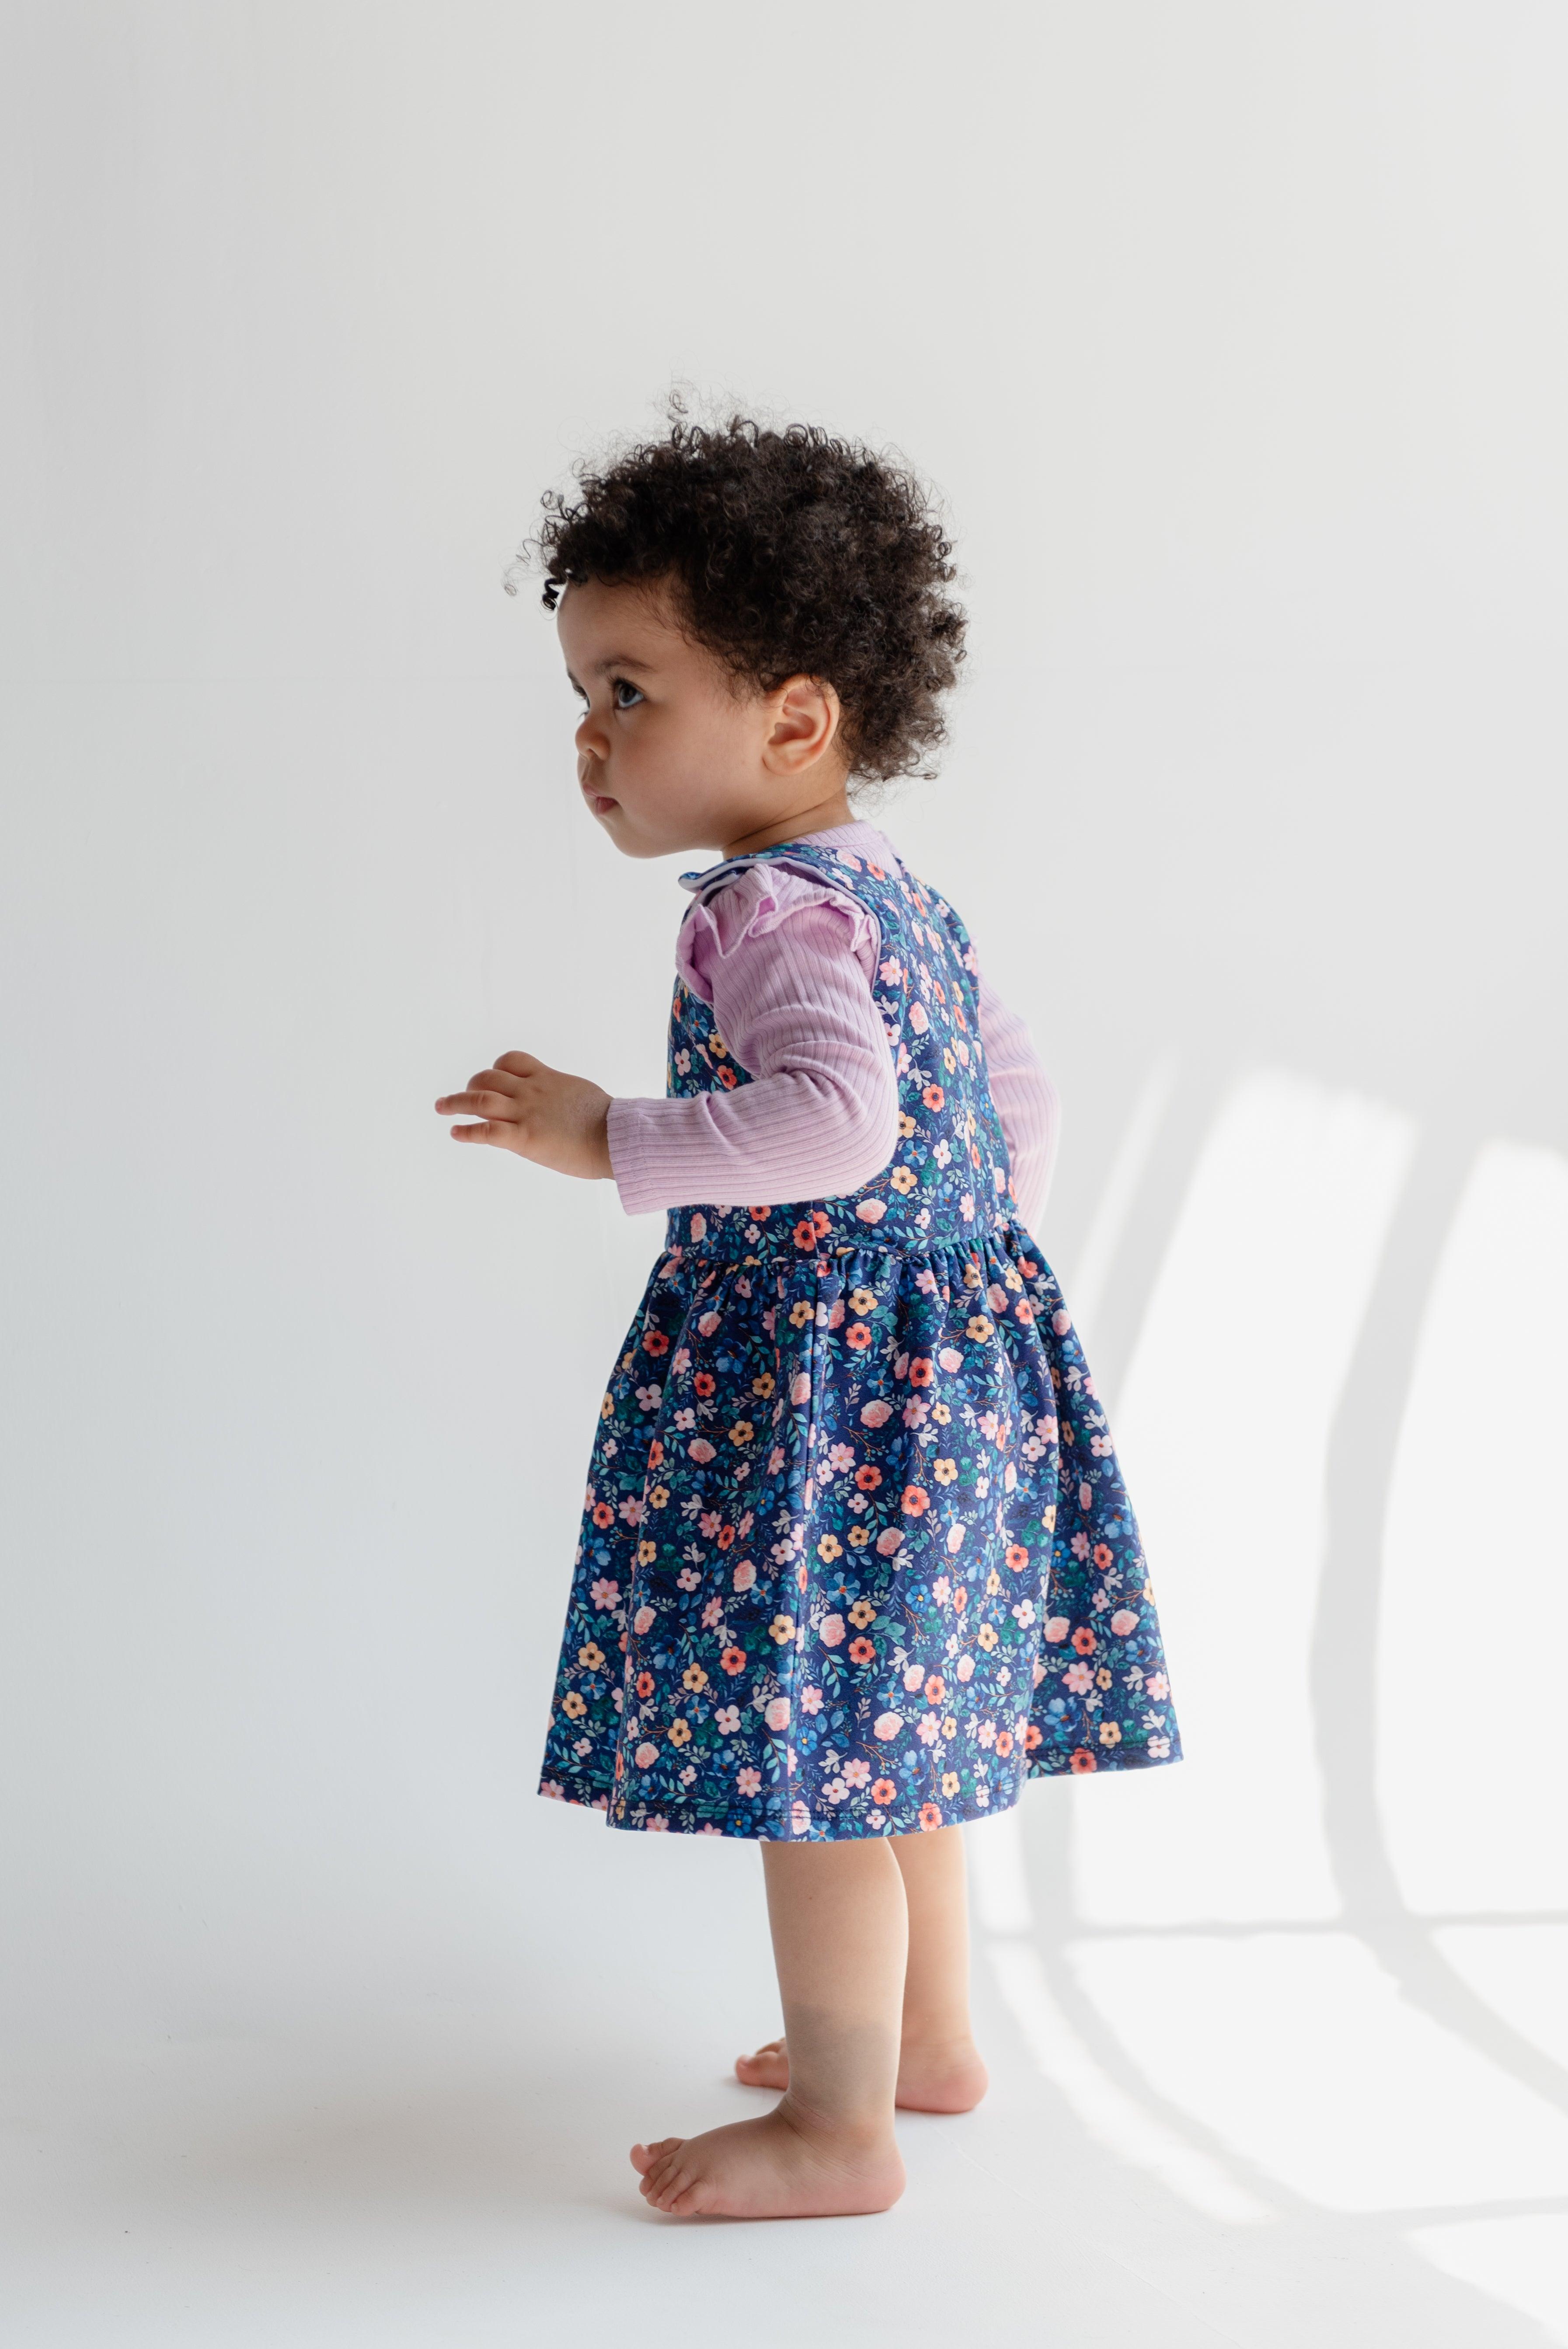 files/navy-dainty-floral-dress-claybearofficial-9.jpg